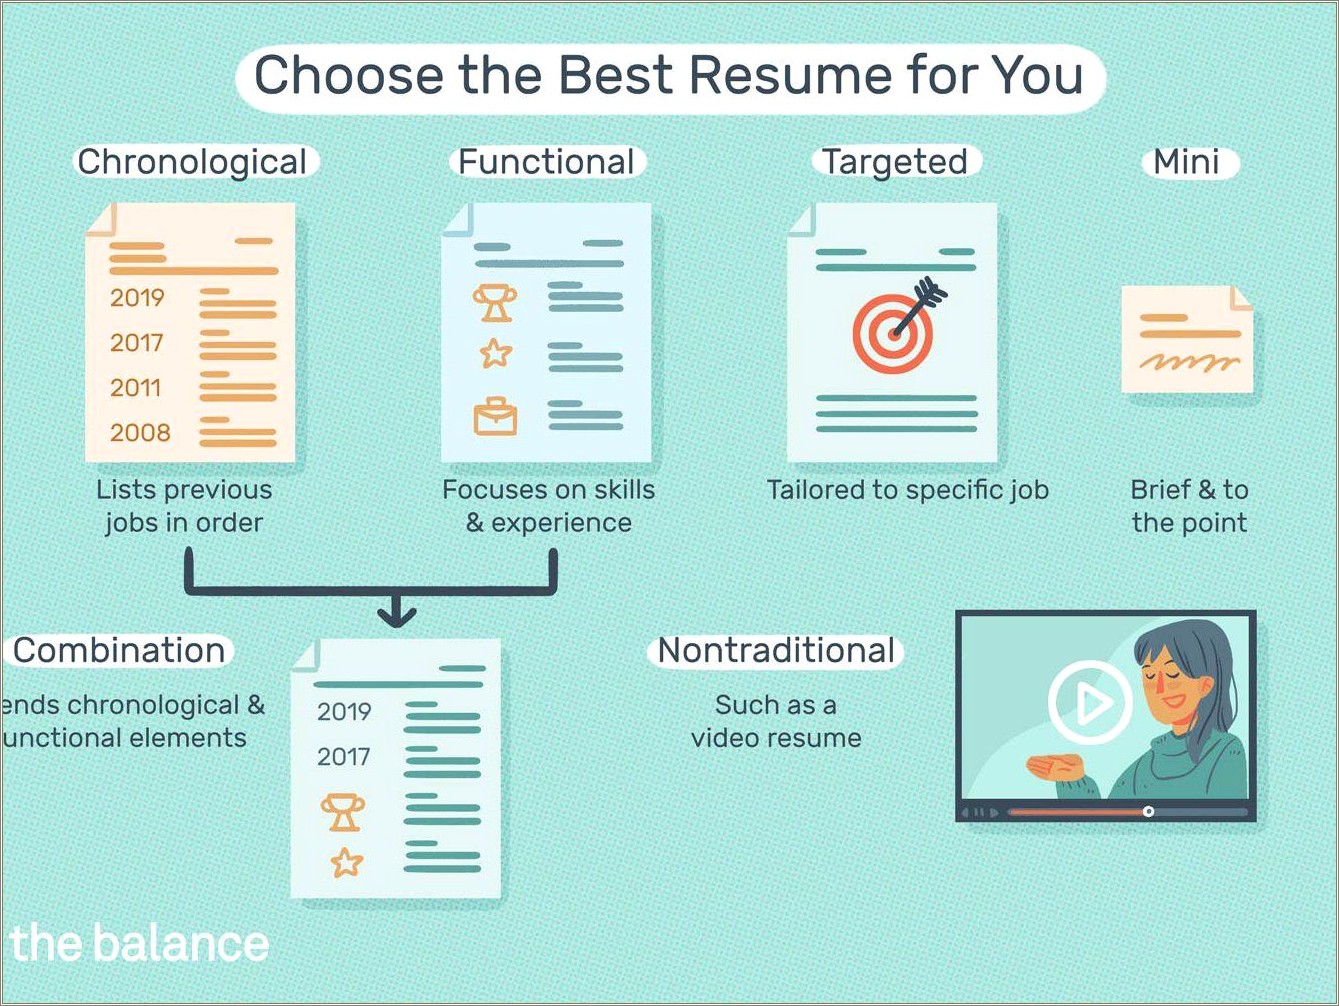 Best Interests To Put On Resume